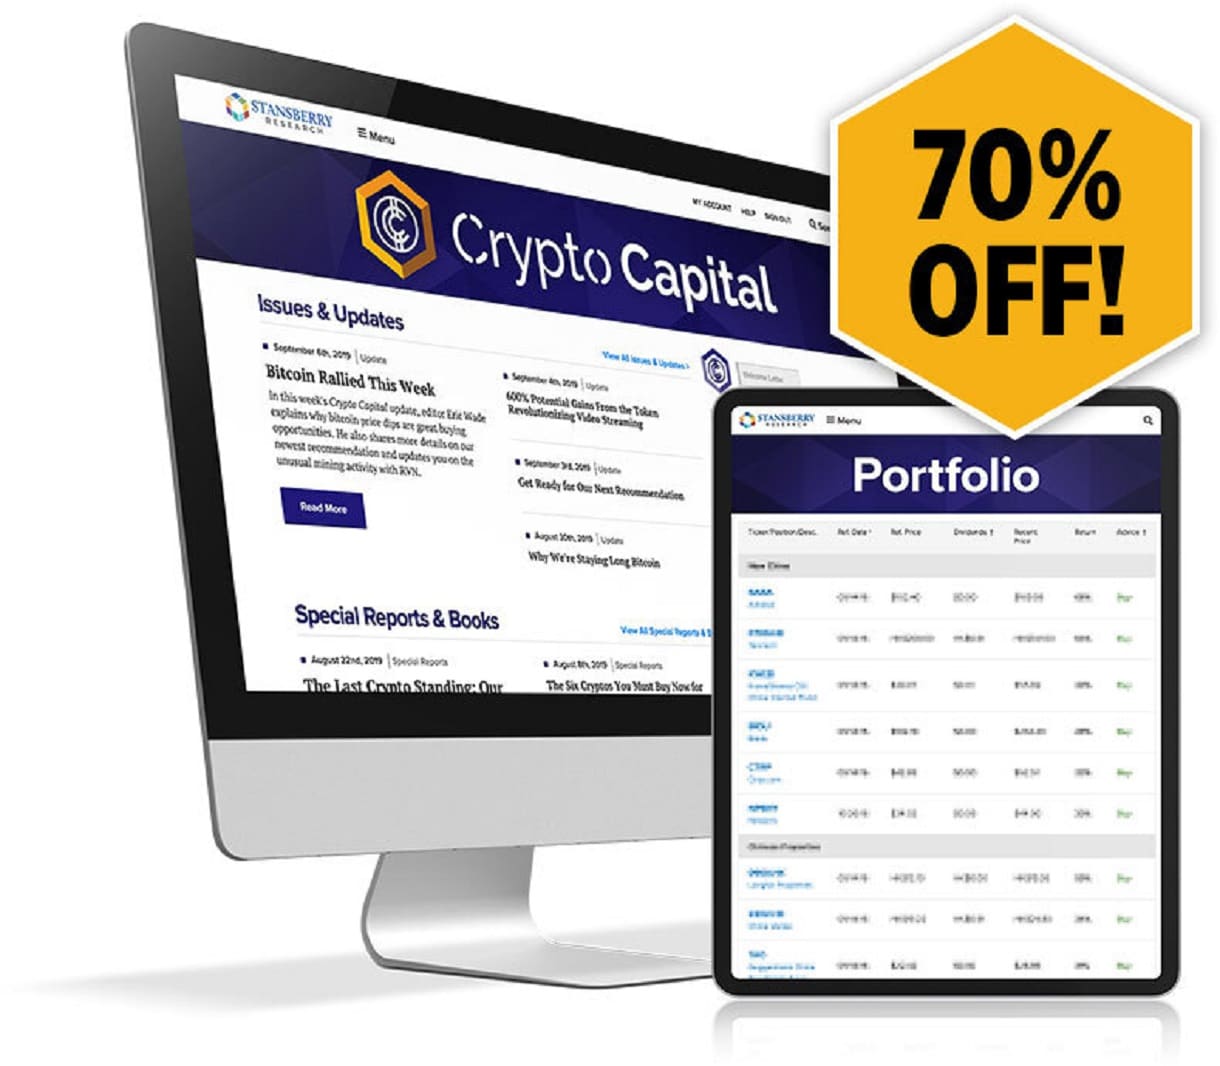 Eric Wade's Crypto Capital Review - 70% OFF